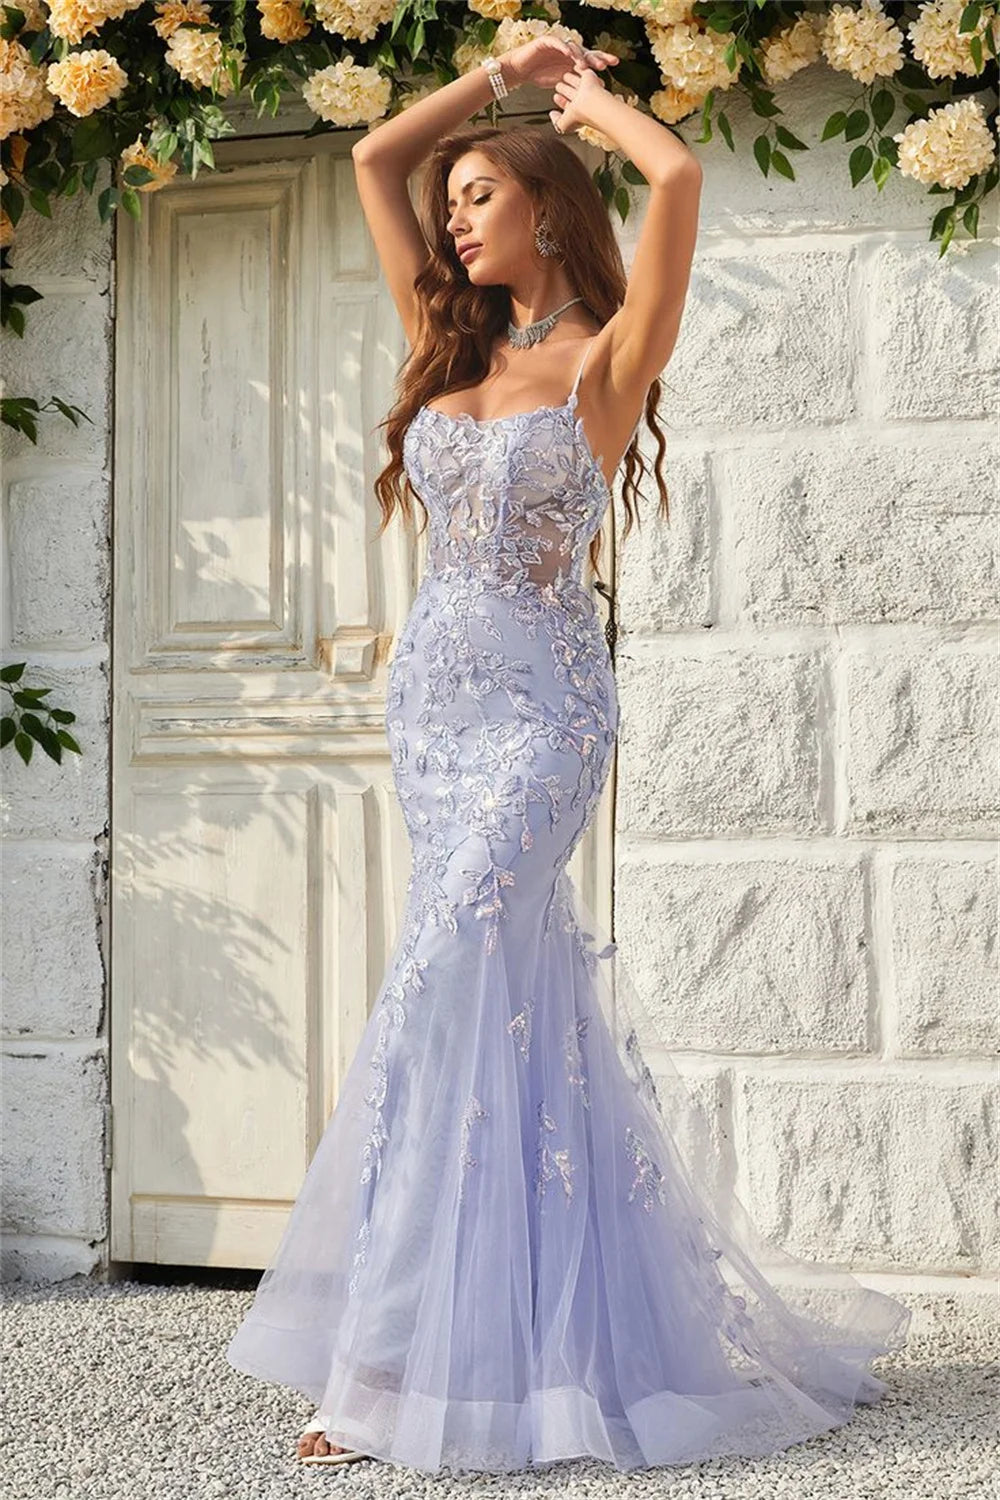 UU-Lavender Sexy Backless Mermaid Prom Dress Spaghetti Strap  fiesta Lace Embroidery Tulle Evening Dress 2024